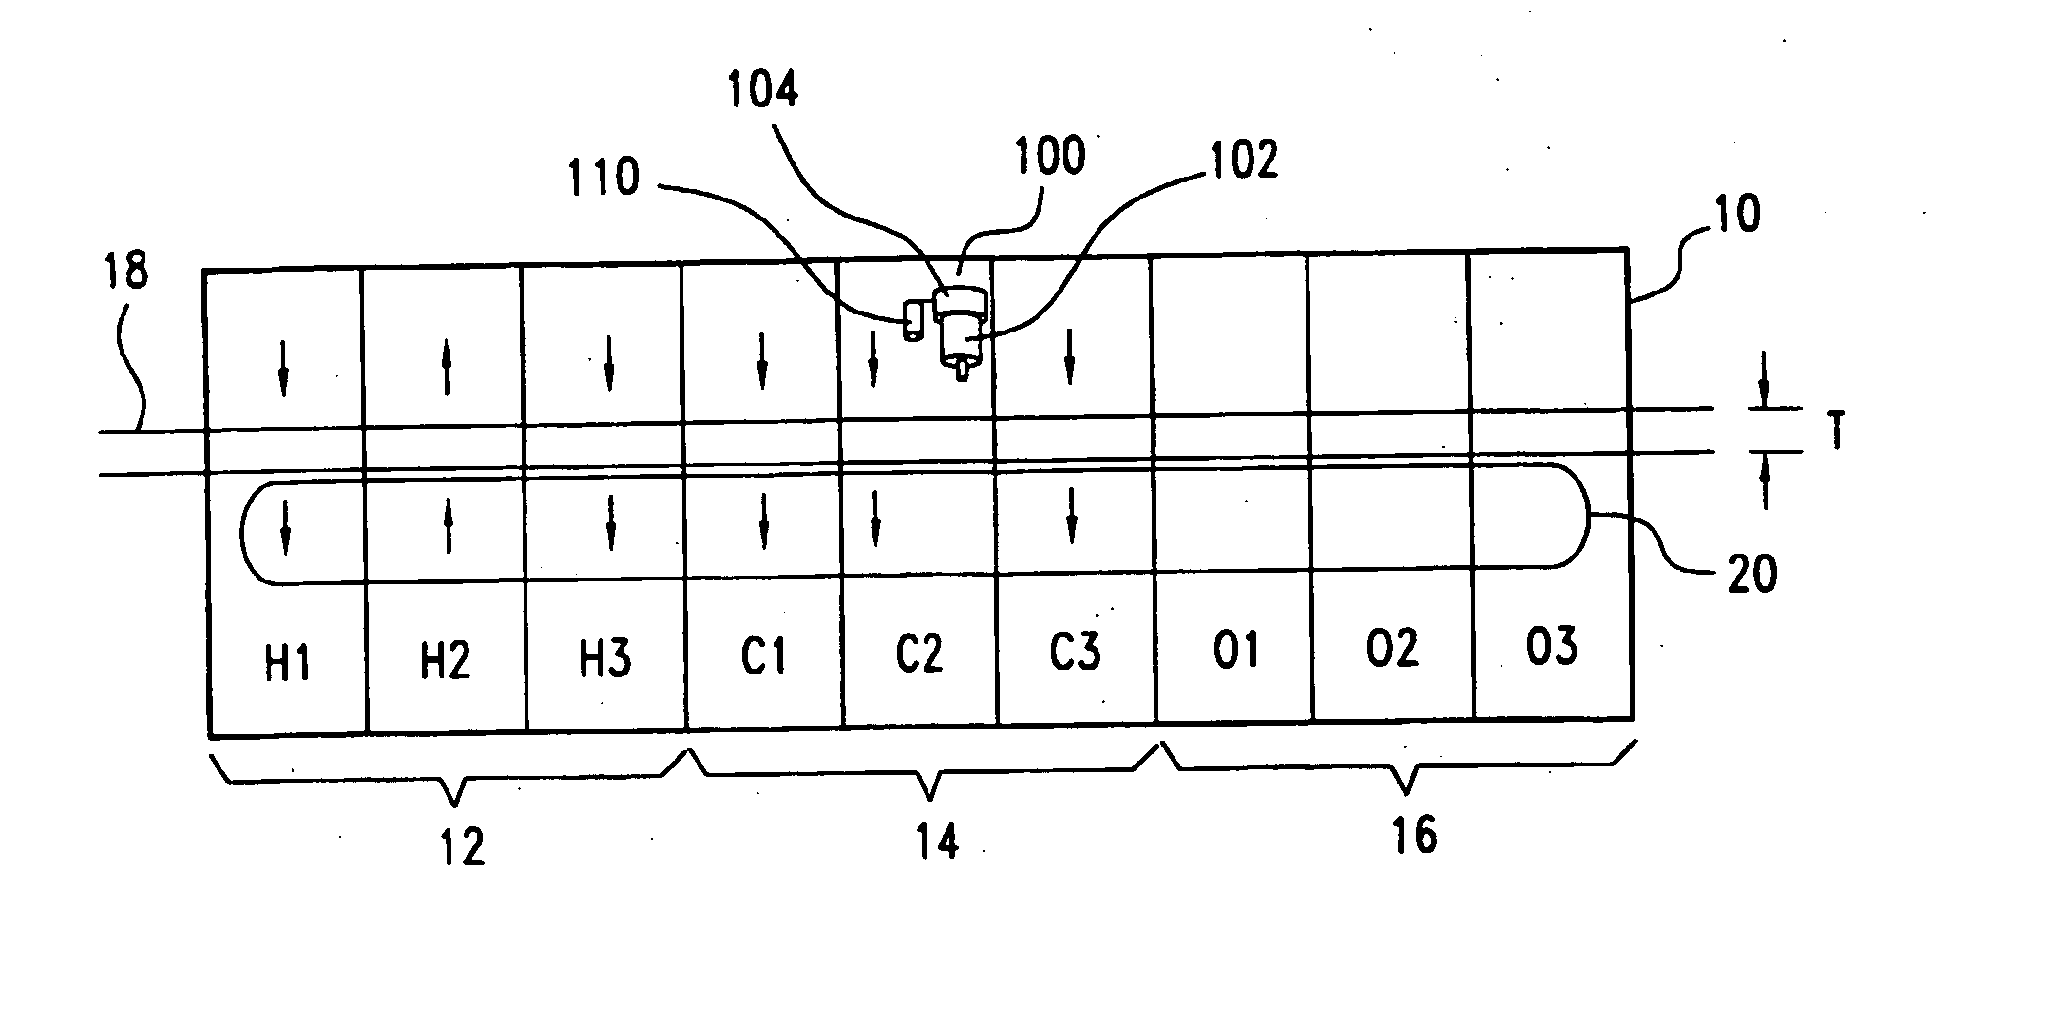 Traversing measurement system for a dryer and associated method